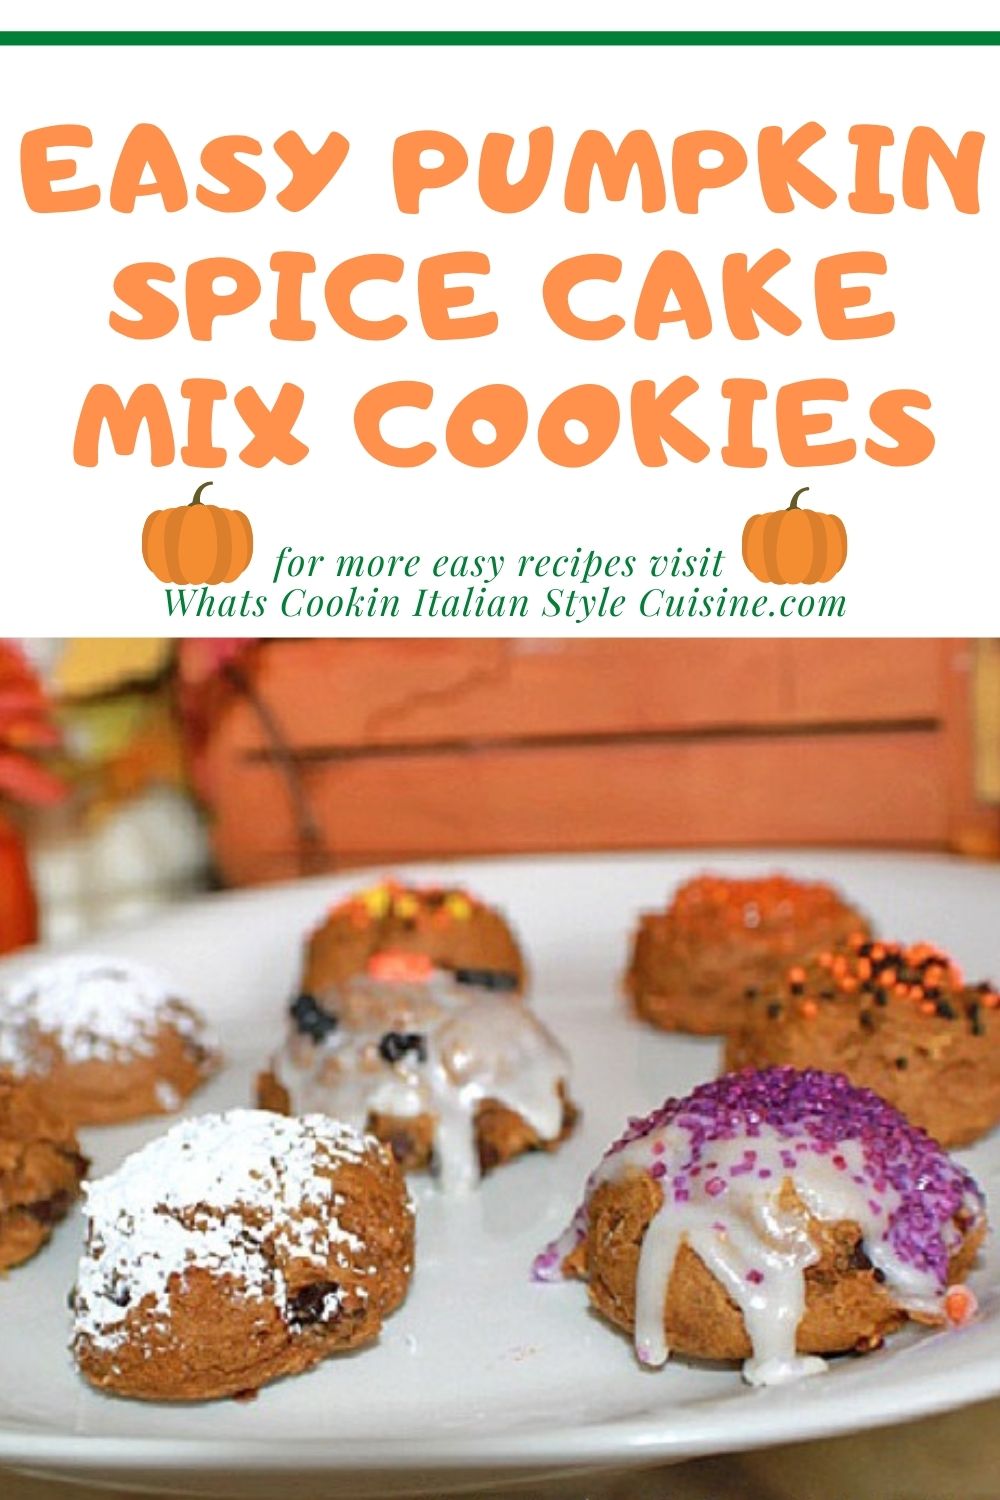 Easy Pumpkin Spice Cake Mix Cookies | What's Cookin' Italian Style Cuisine